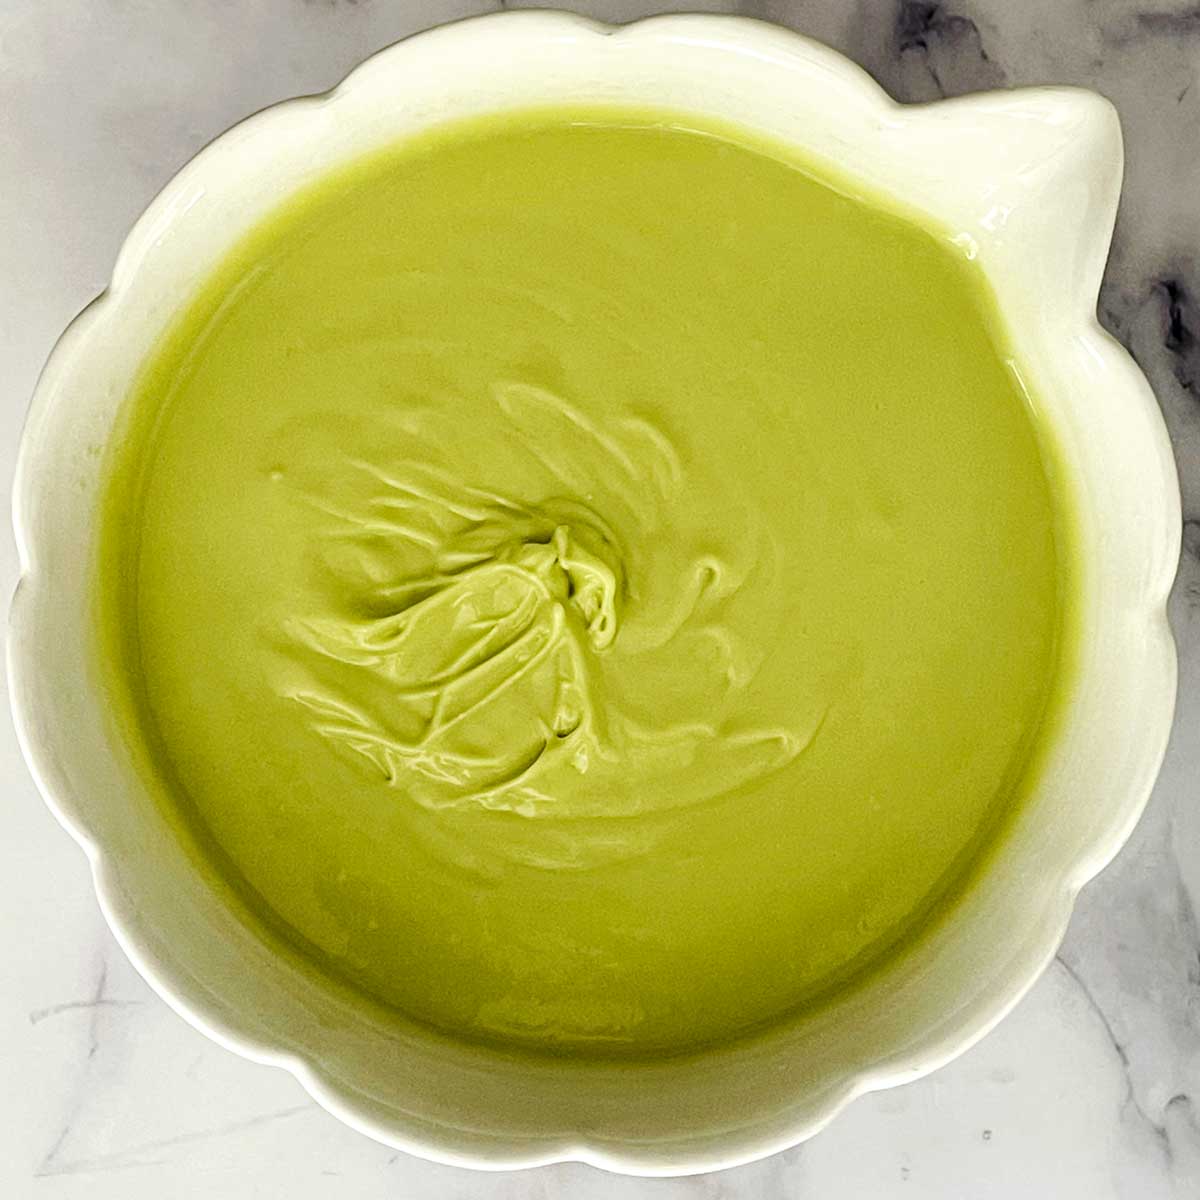 Avocado Ice cream ingredients mix in a bowl.